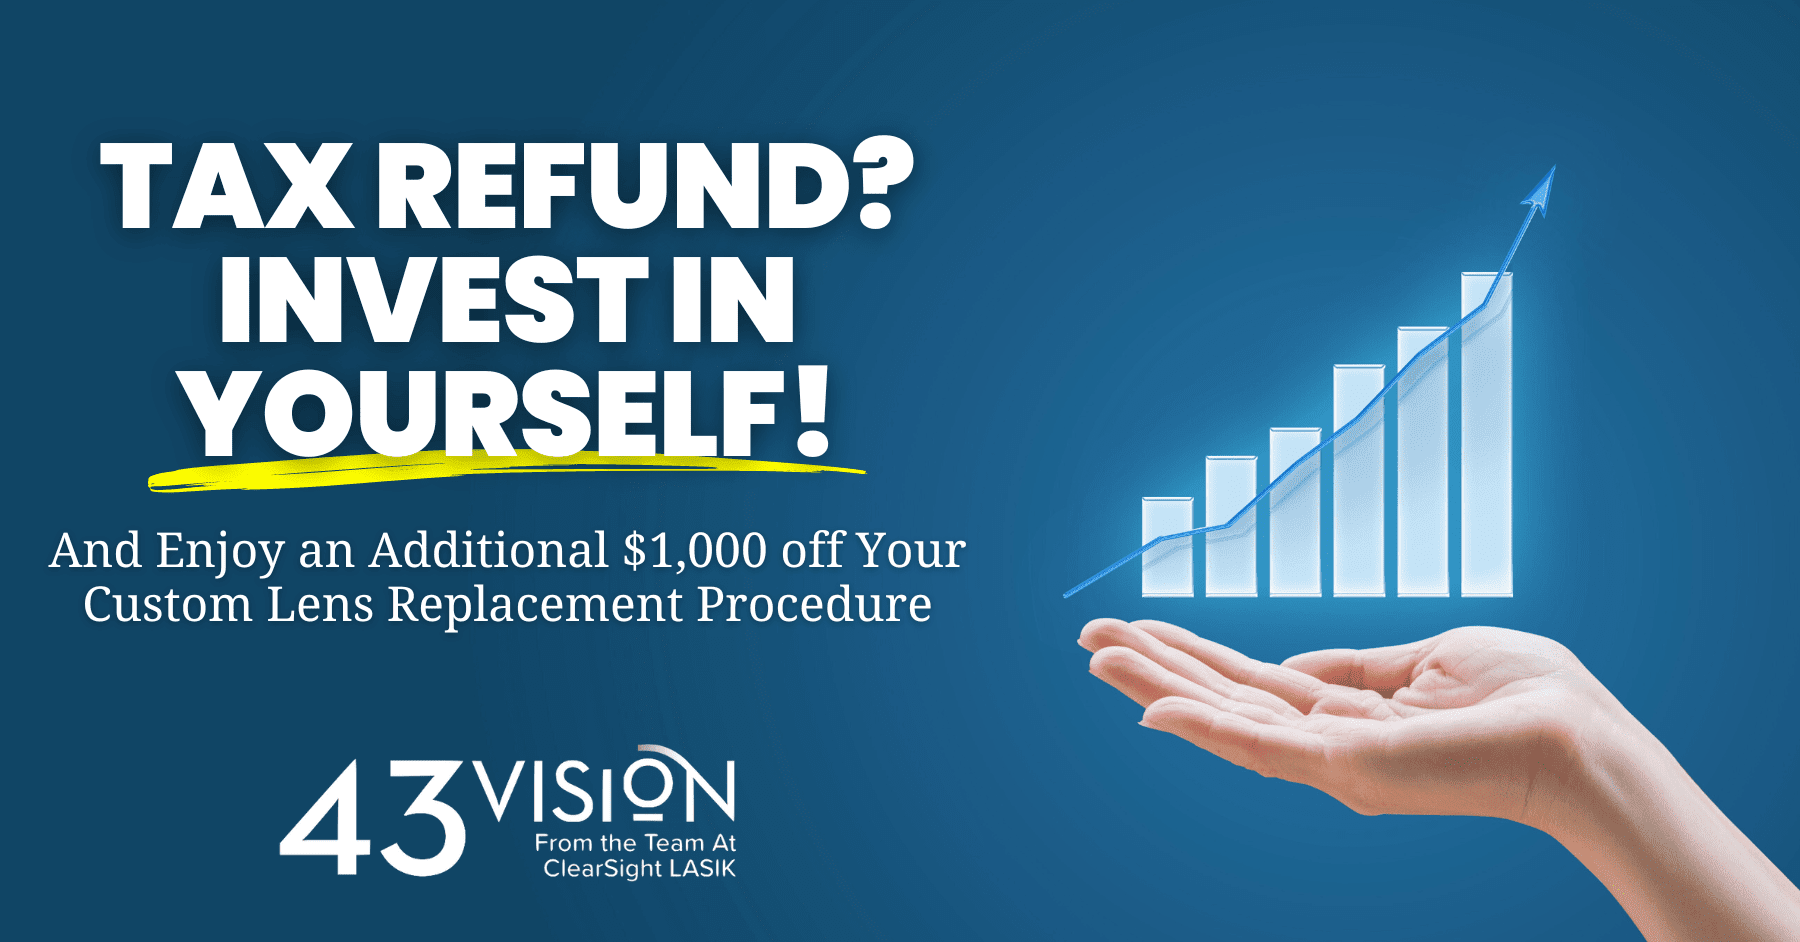 Tax Refund? Invest in Yourself and Enjoy an Extra $1,000 Off Custom Lens Replacement